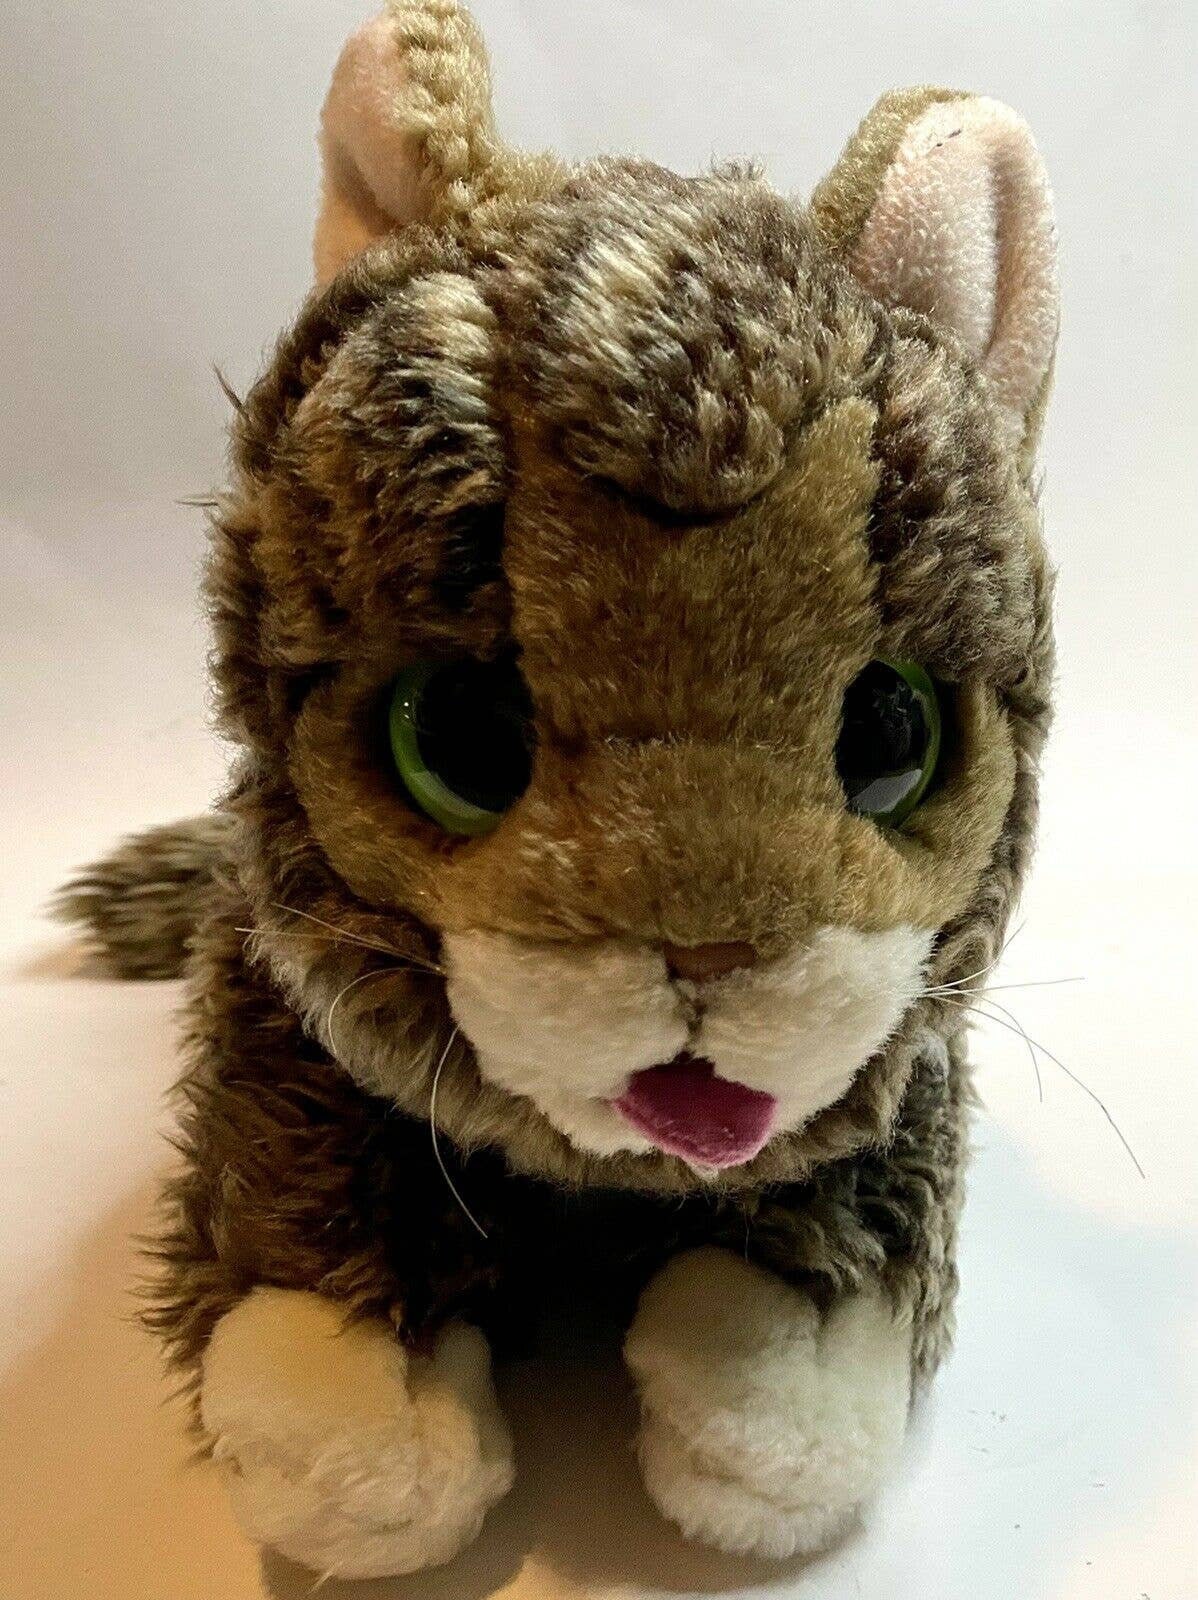 Your Very Own Lil BUB (Plush Toy)